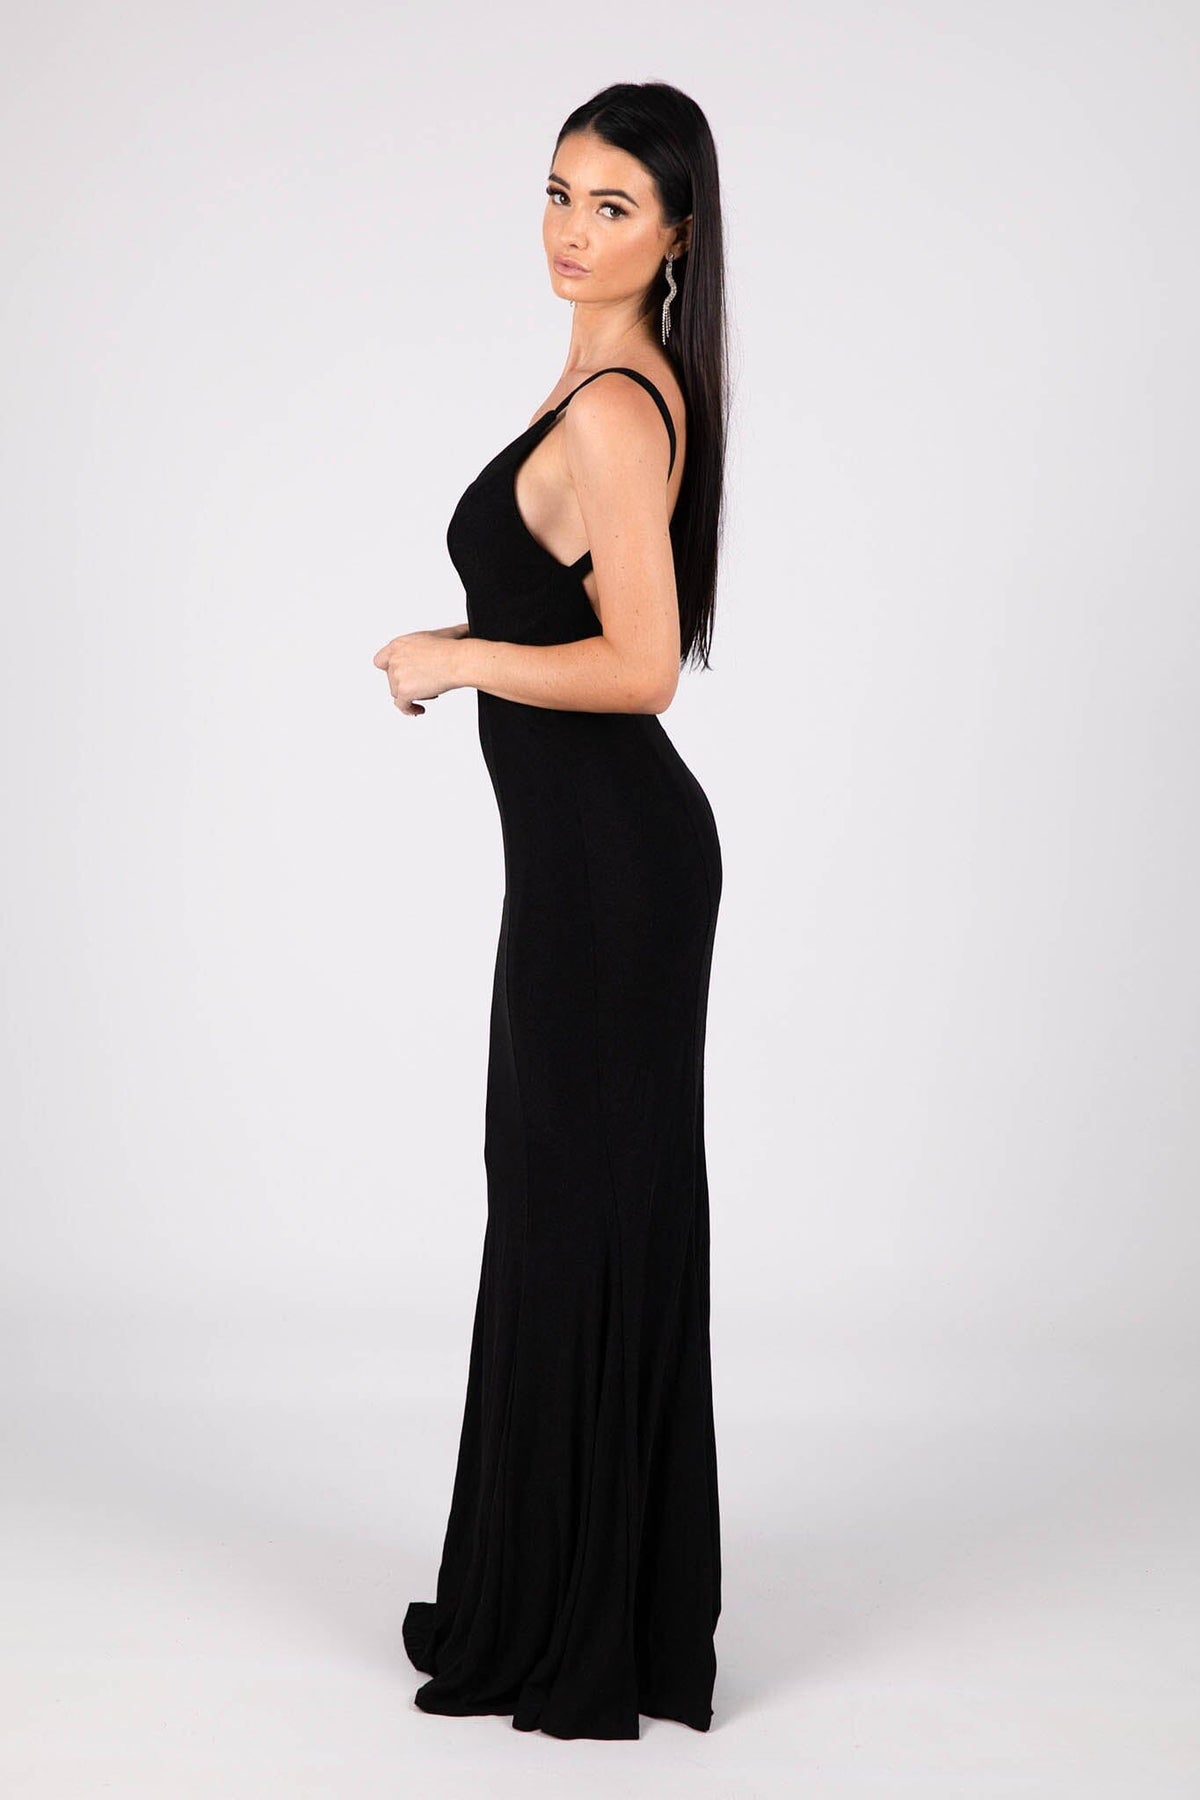 Side Image of Shimmer Black Fitted Evening Gown with V Neckline and Backless Design